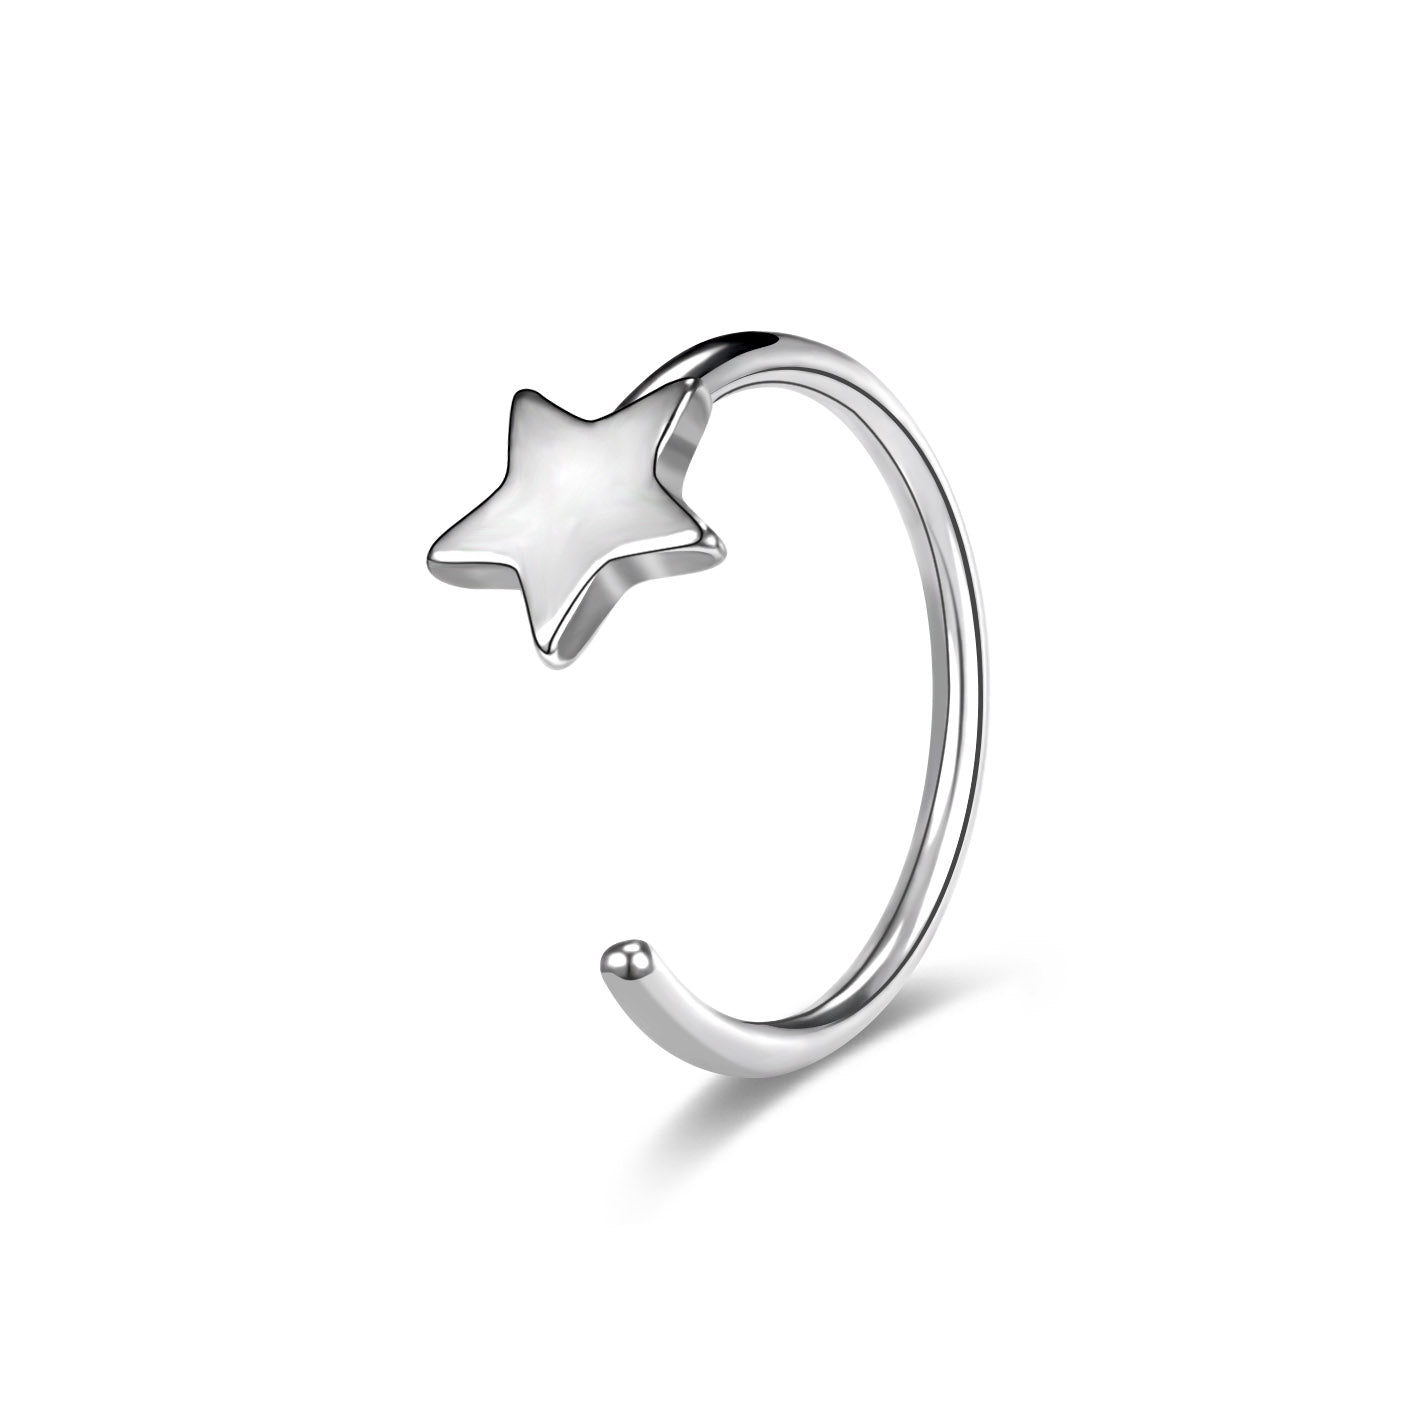 20G Black Silver Star Nose Ring C Shaped Nose Stud Stainless Steel Nose Rings Piercing